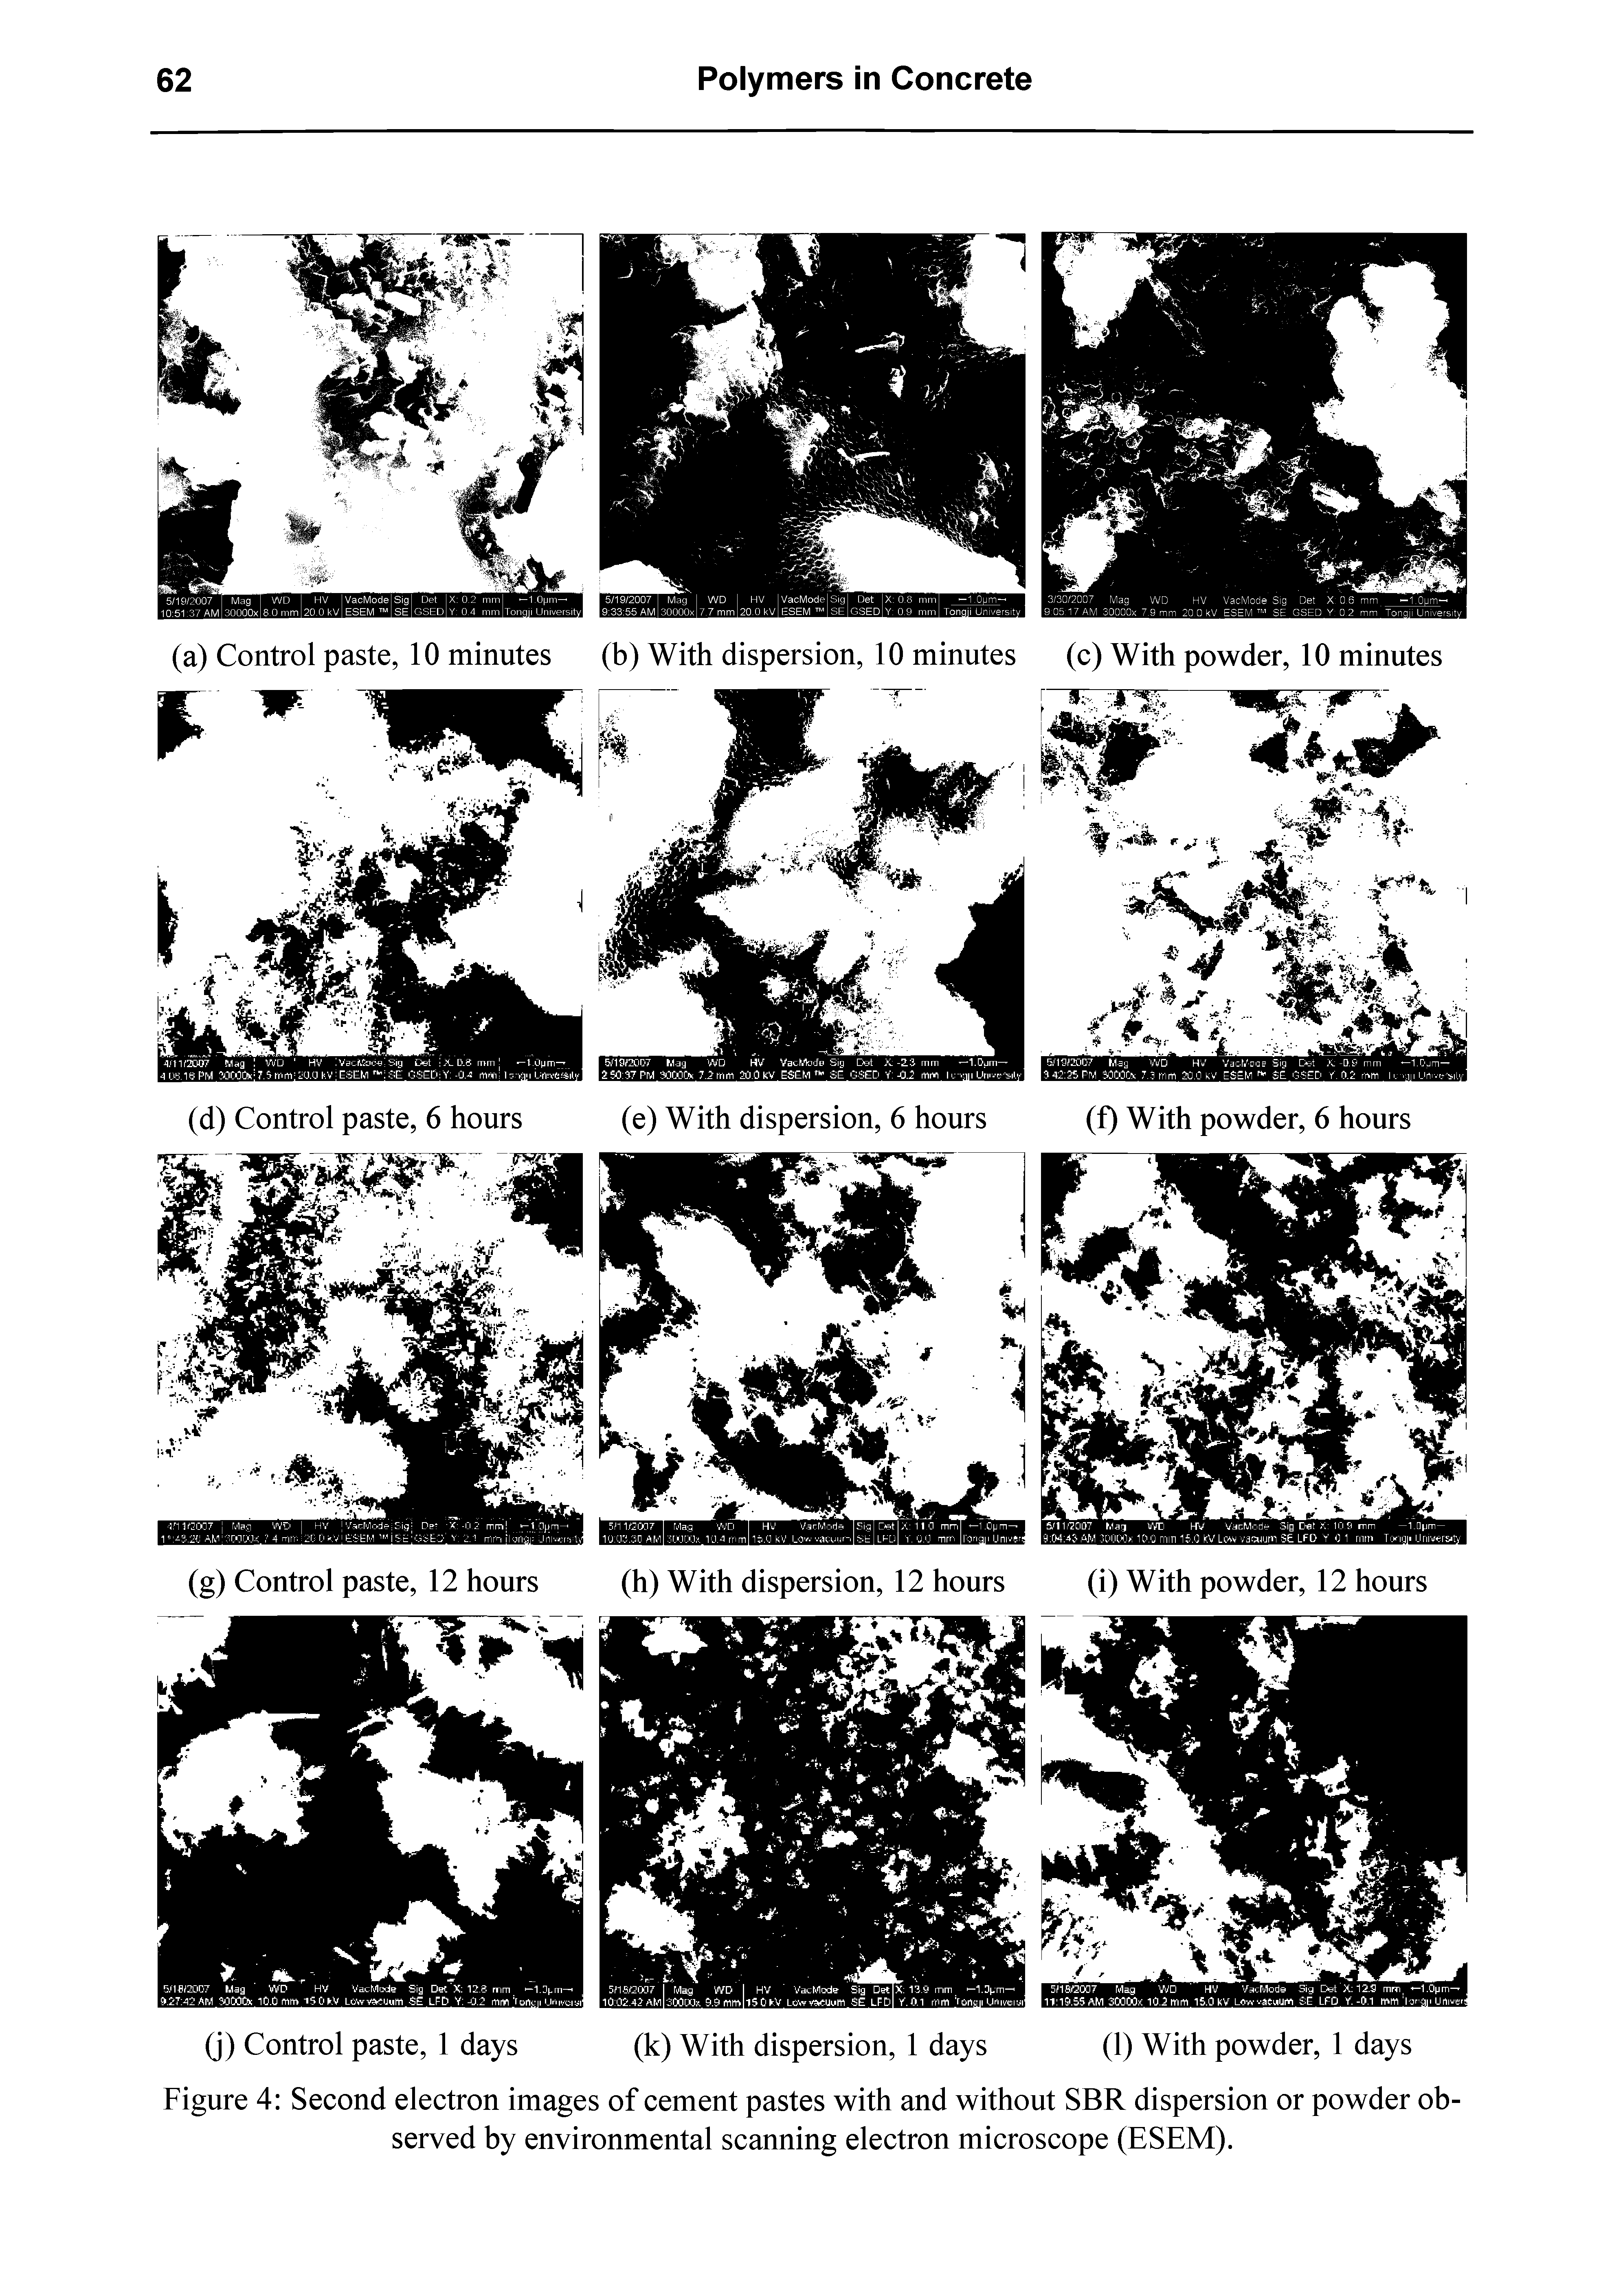 Figure 4 Second electron images of cement pastes with and without SBR dispersion or powder observed by environmental scanning electron microscope (ESEM).